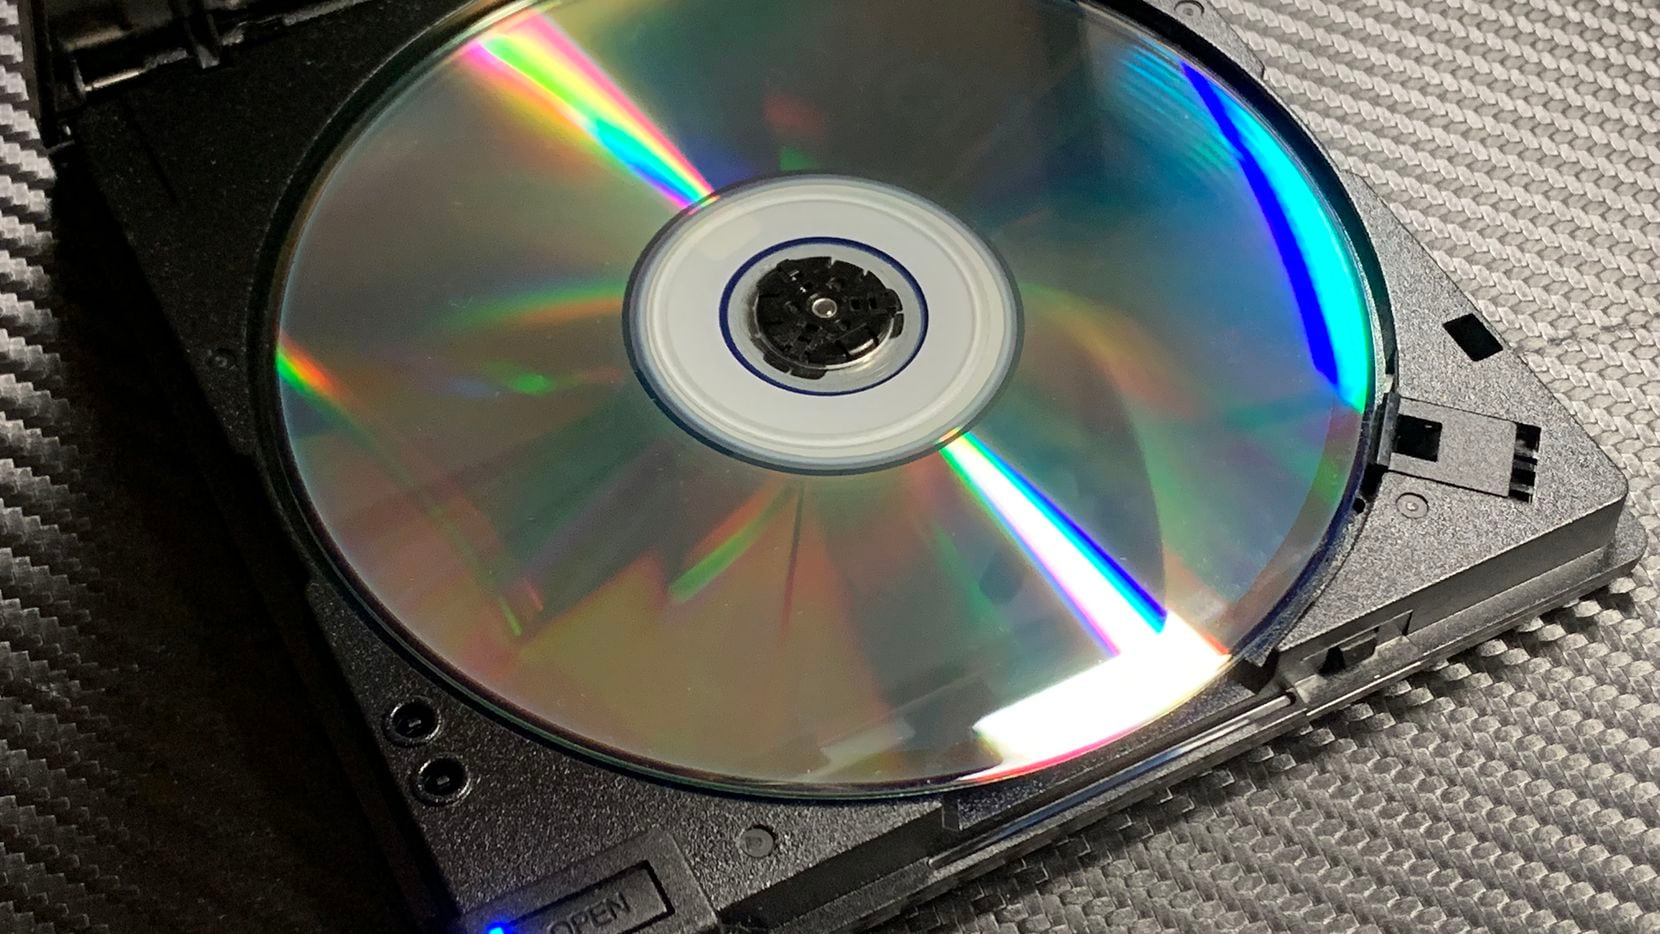 To rip a CD, you'll need a computer with a CD drive.